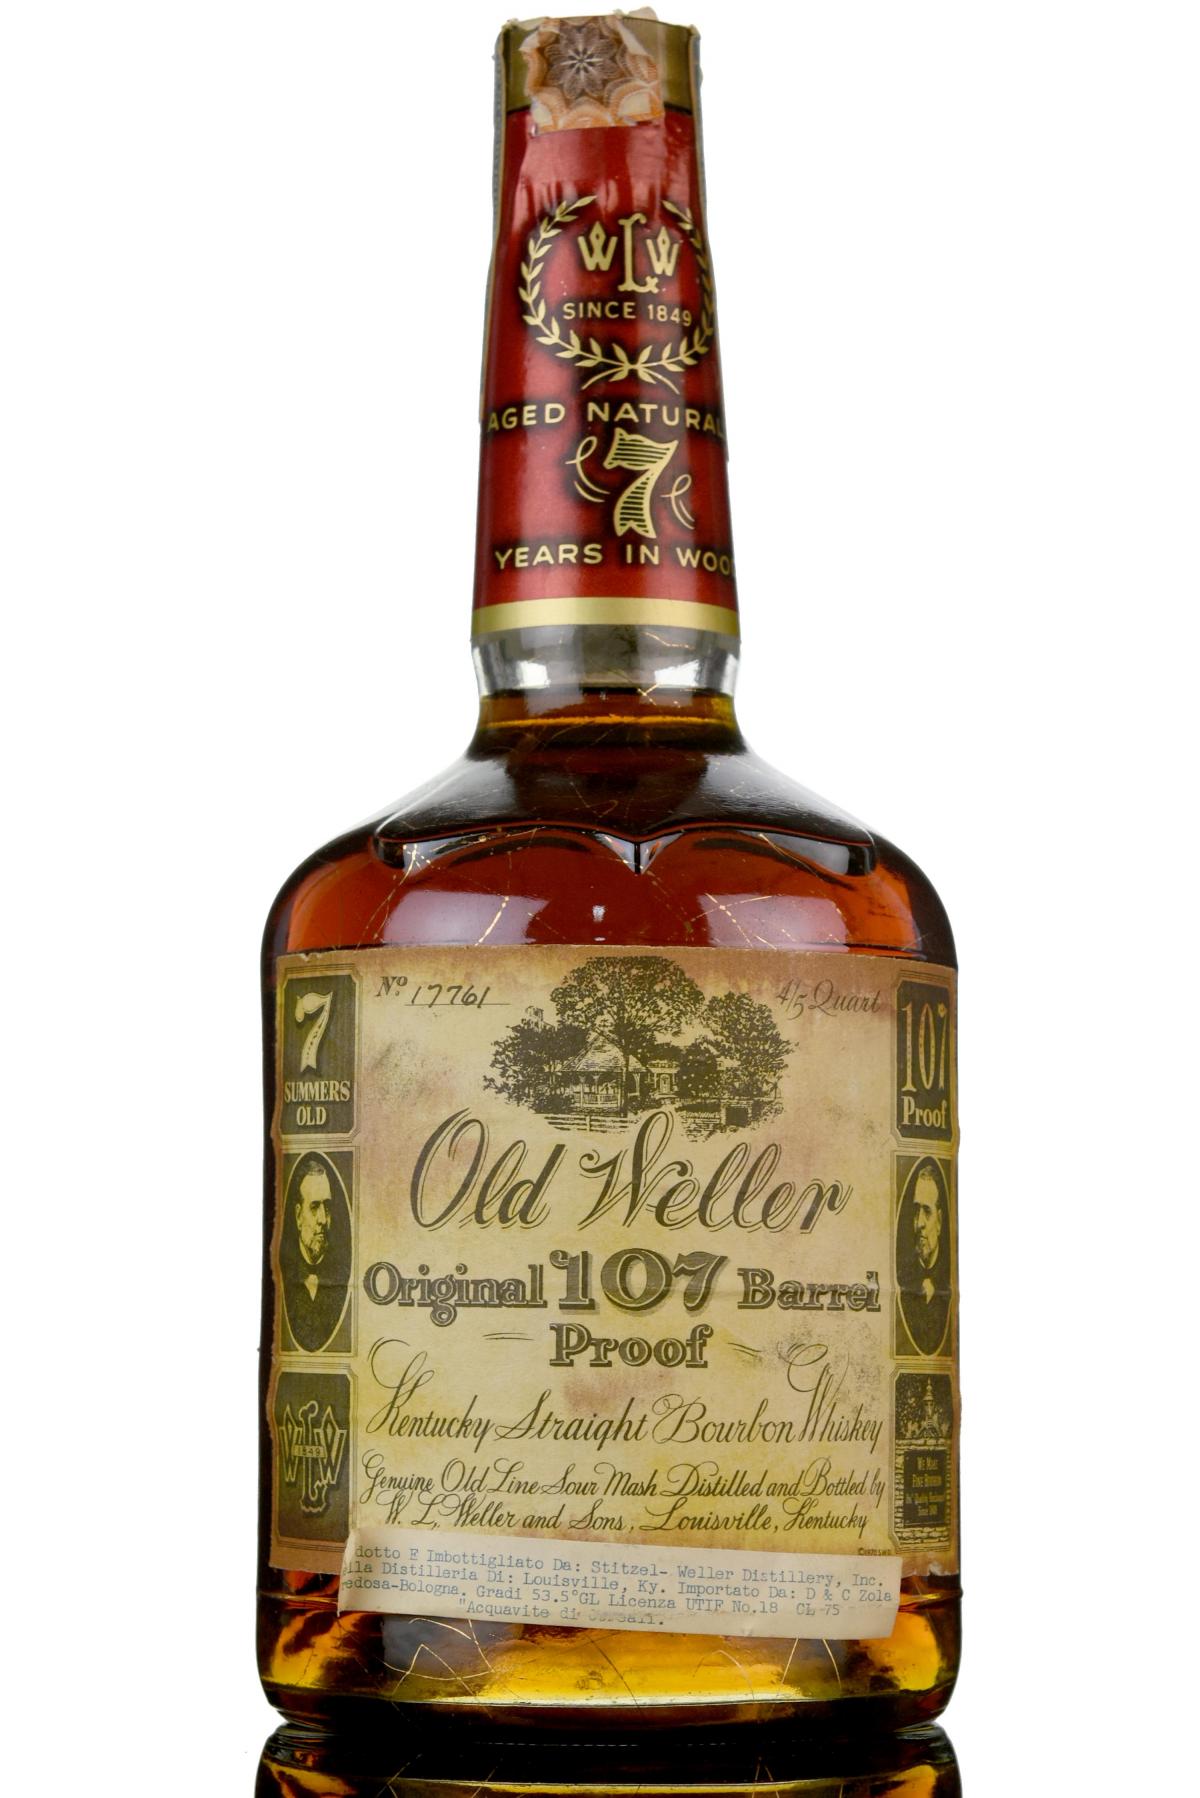 Old Weller 7 Year Old - The Original 107 Proof